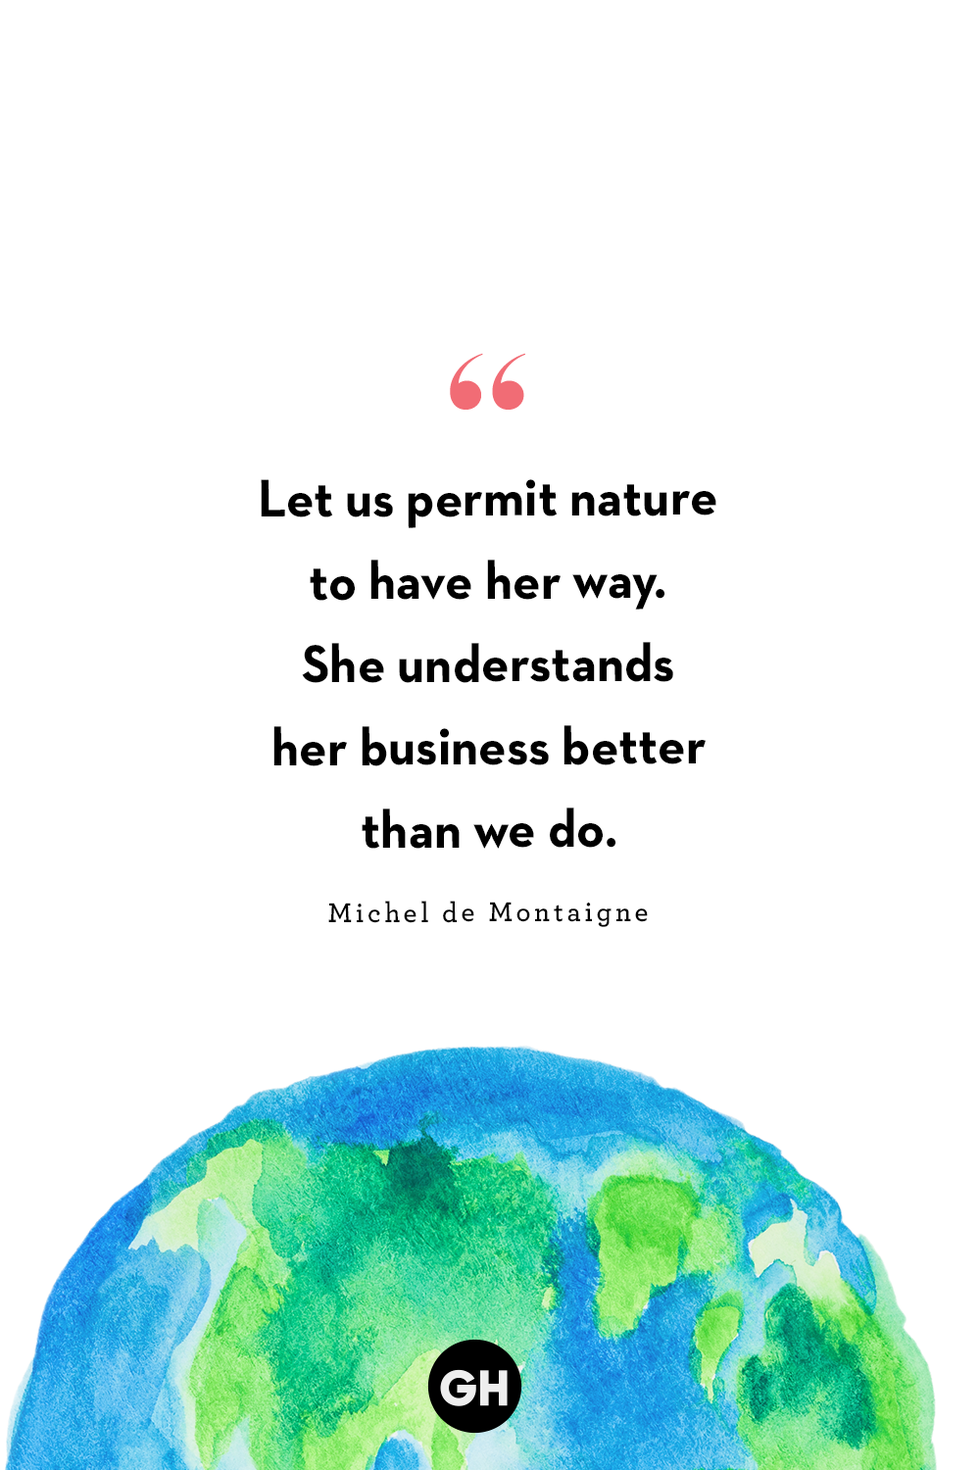 Quotes About Saving The Earth